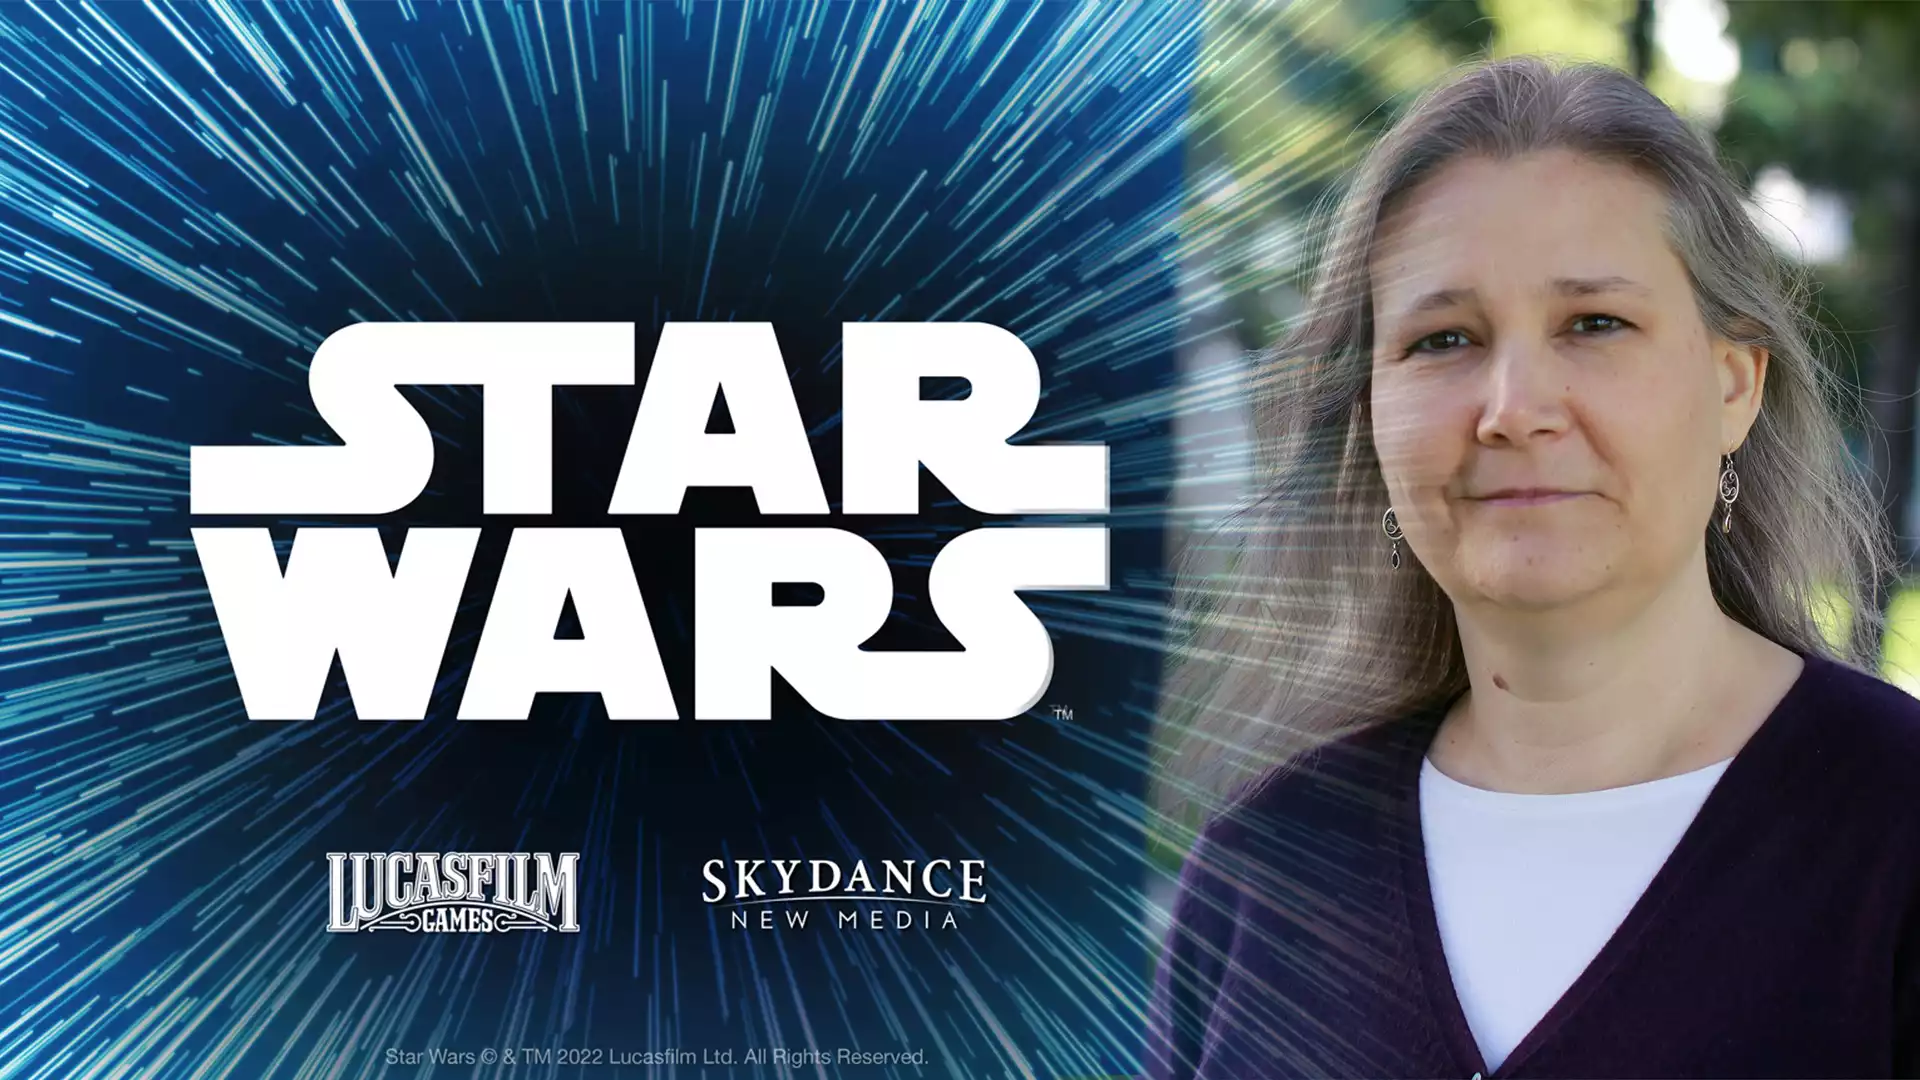 Amy Hennig's Skydance New Media Is Working On A New Star Wars Game